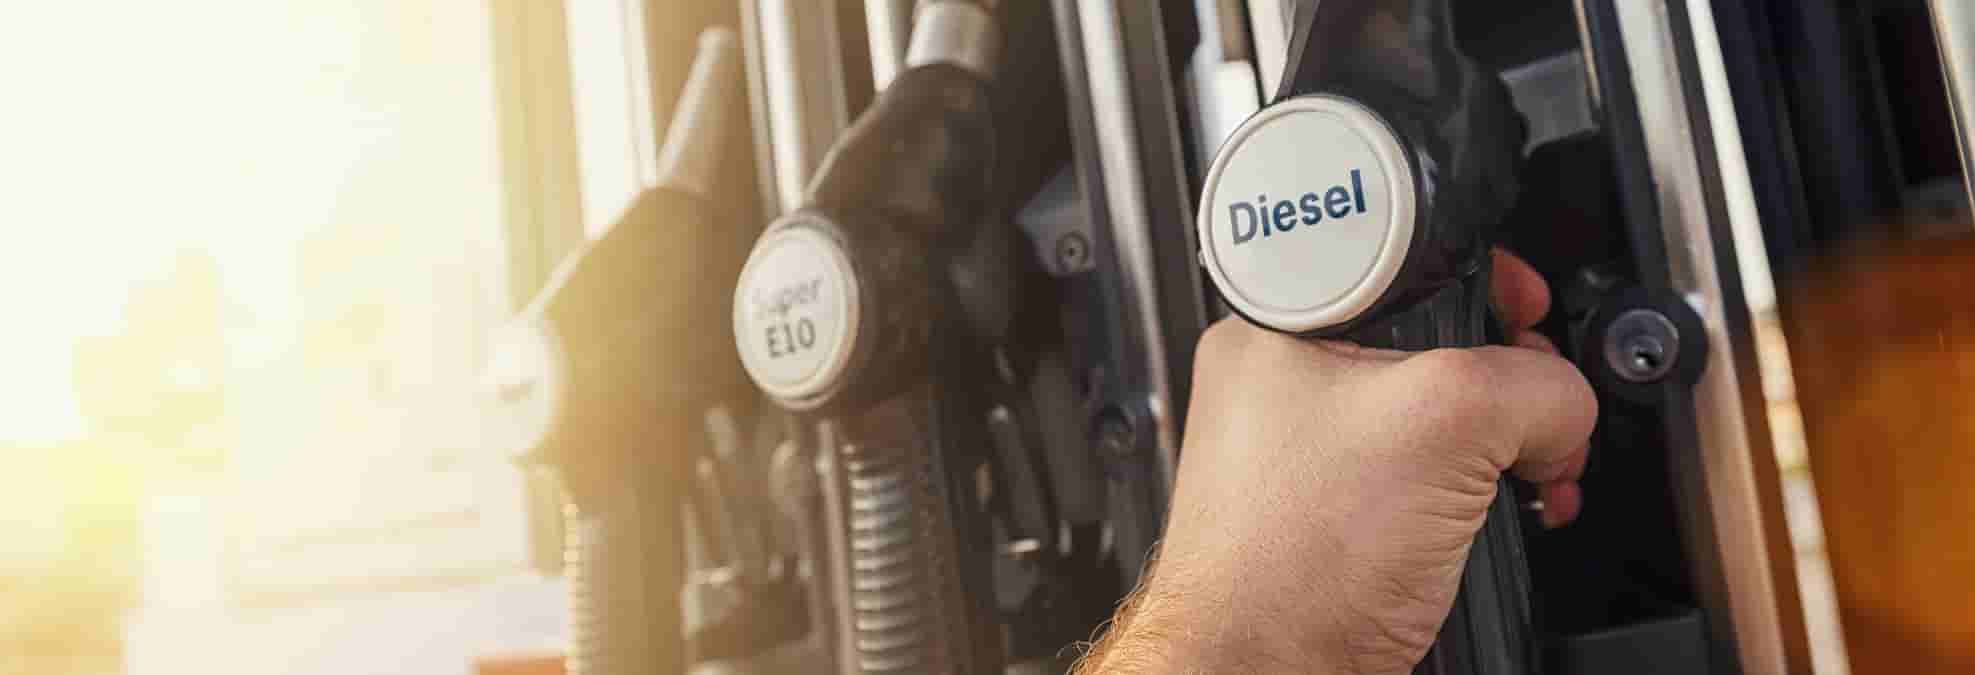 Workers to Face Diesel Price Hikes